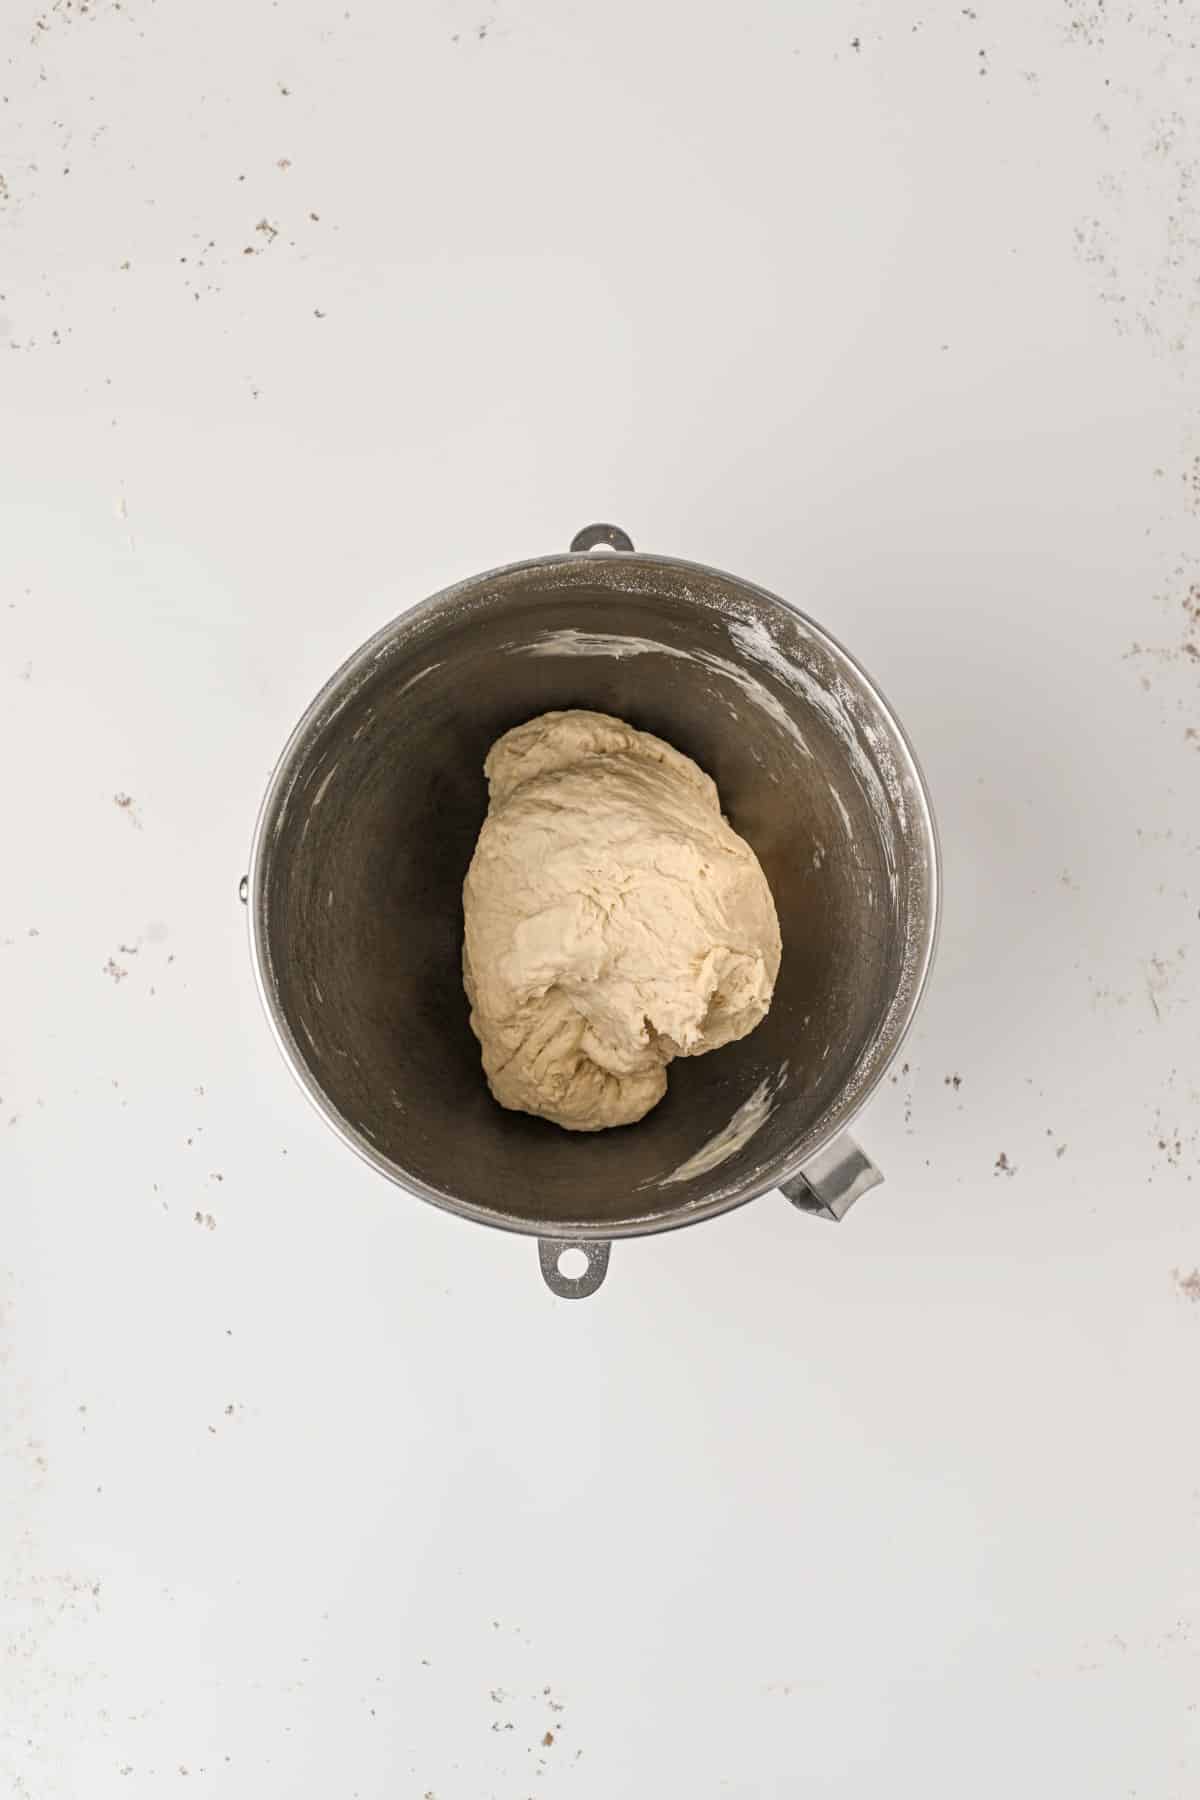 Dough just created in a bowl. 